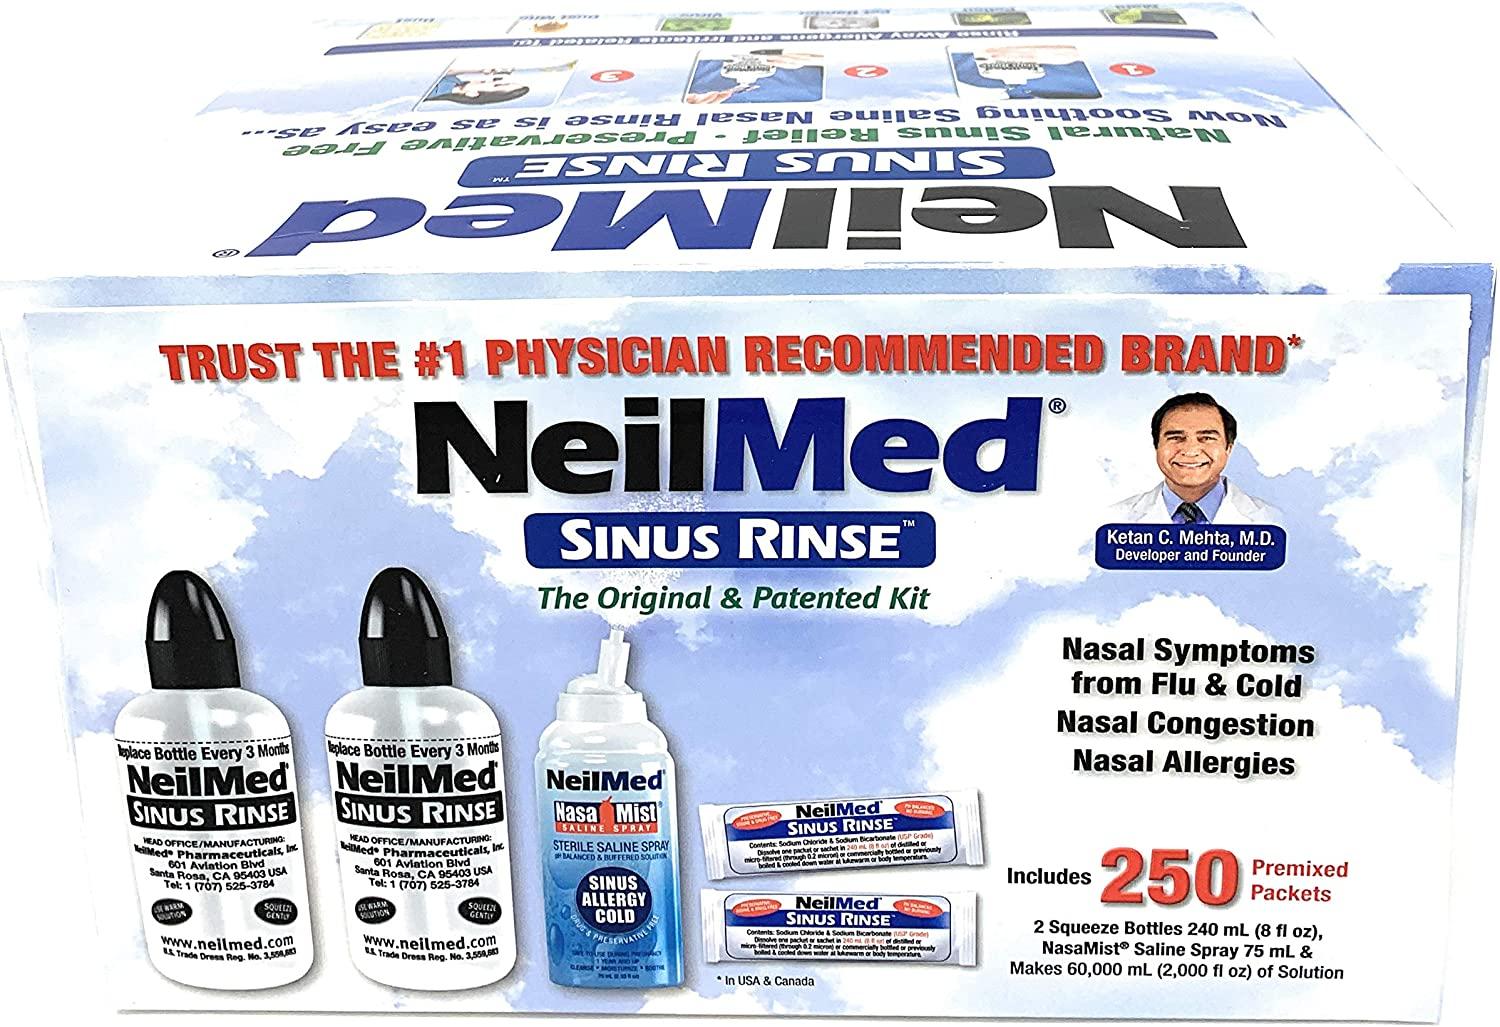 NeilMed Sinus Rinse All Natural Relief Premixed - 250 Packets